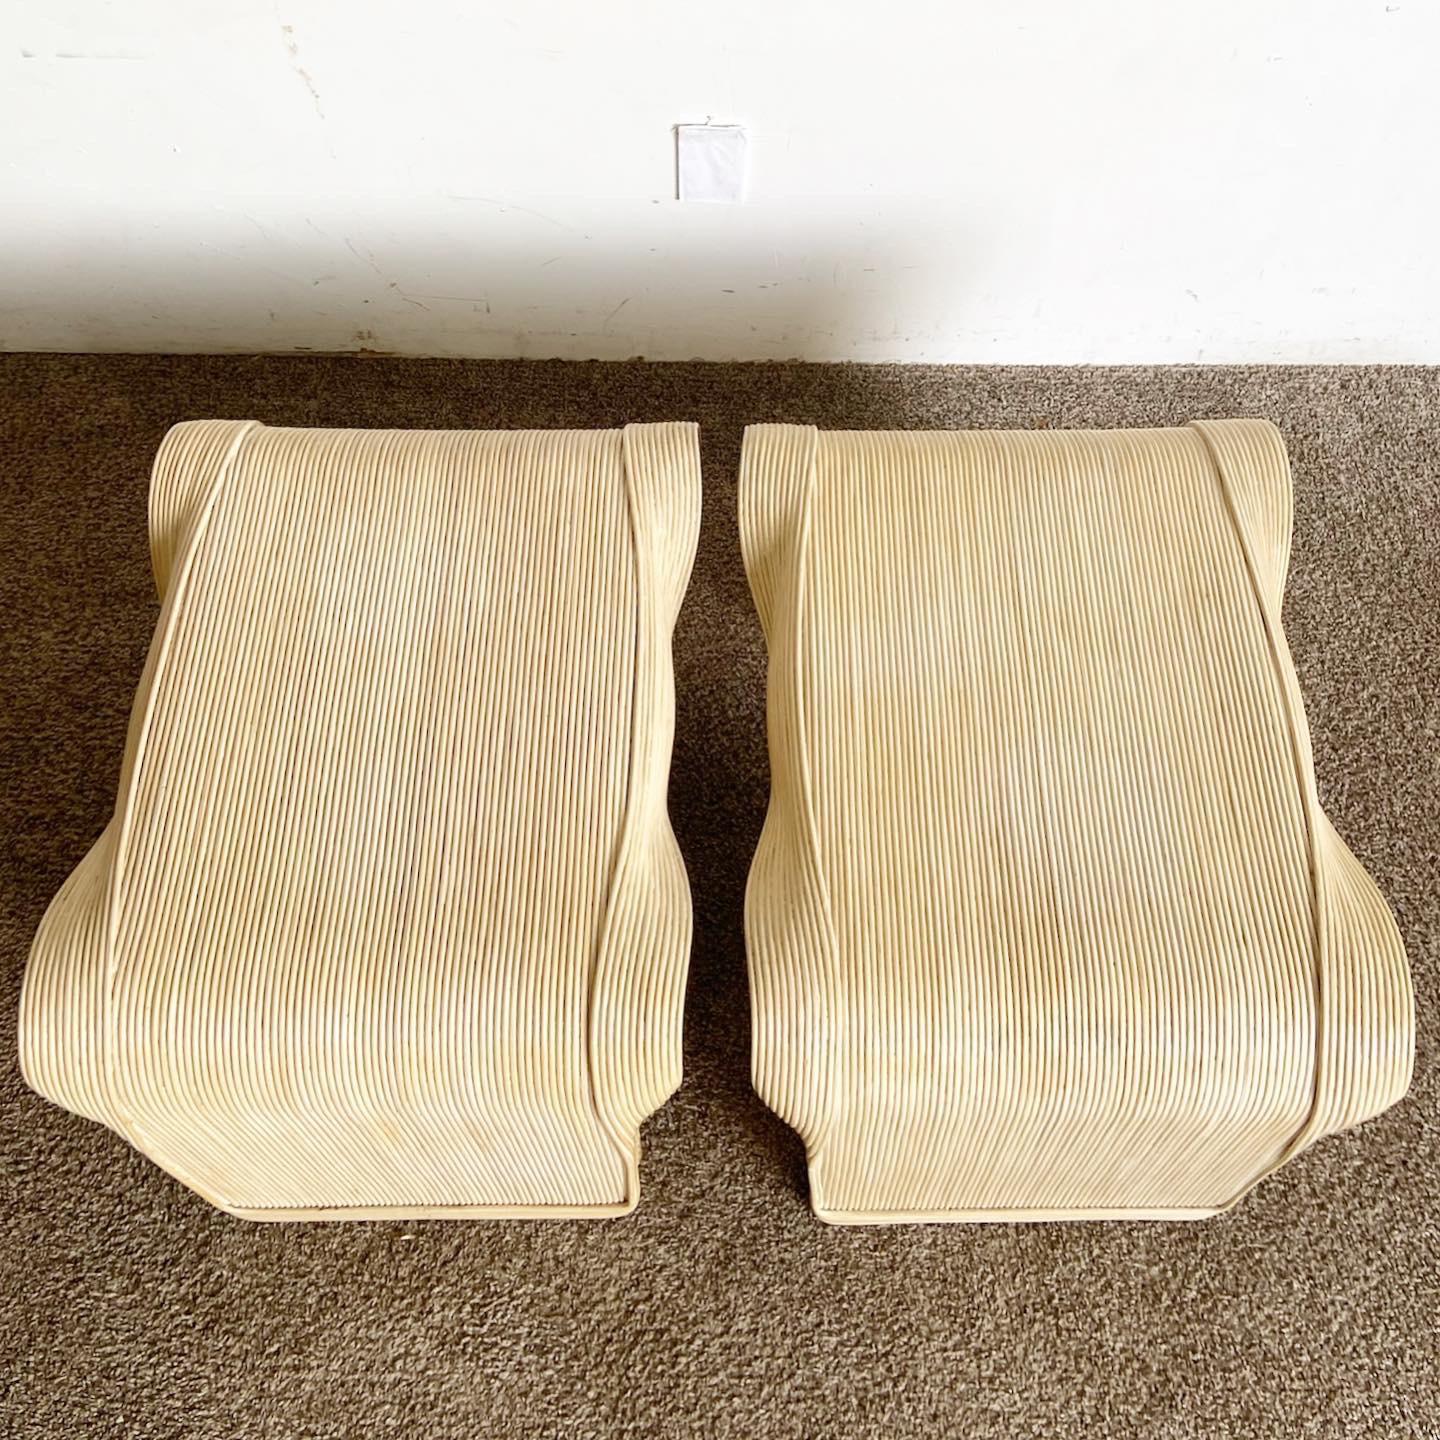 Boho Chic Wavy Ribbon Pencil Reed Side Tables - a Pair In Good Condition For Sale In Delray Beach, FL